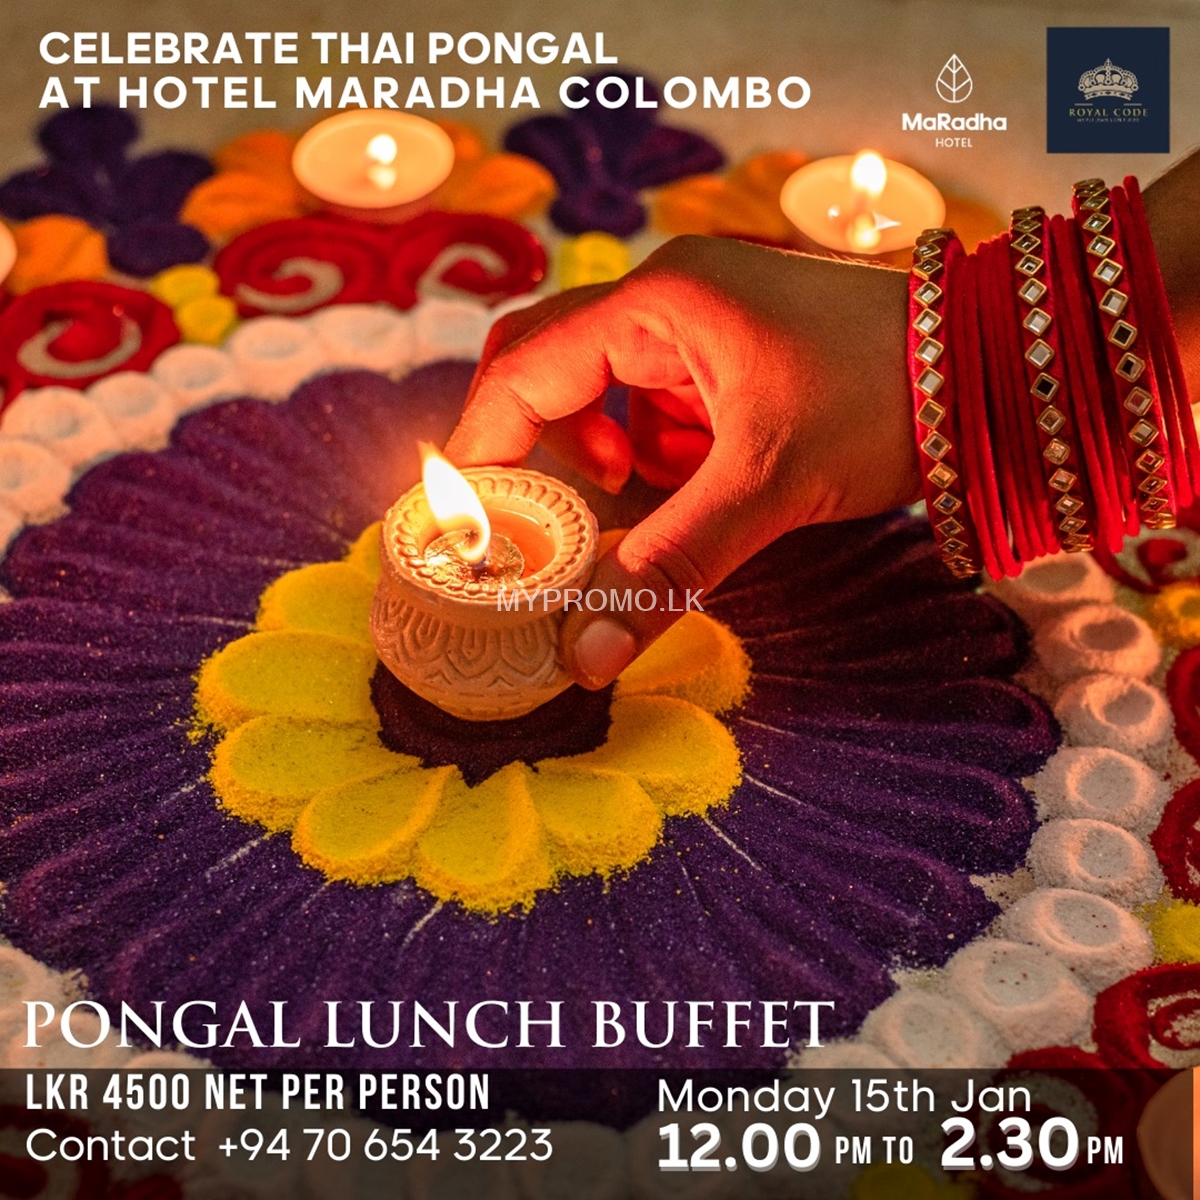 Join us for a delectable Thai Pongal lunch buffet at Hotel MaRadha Colombo